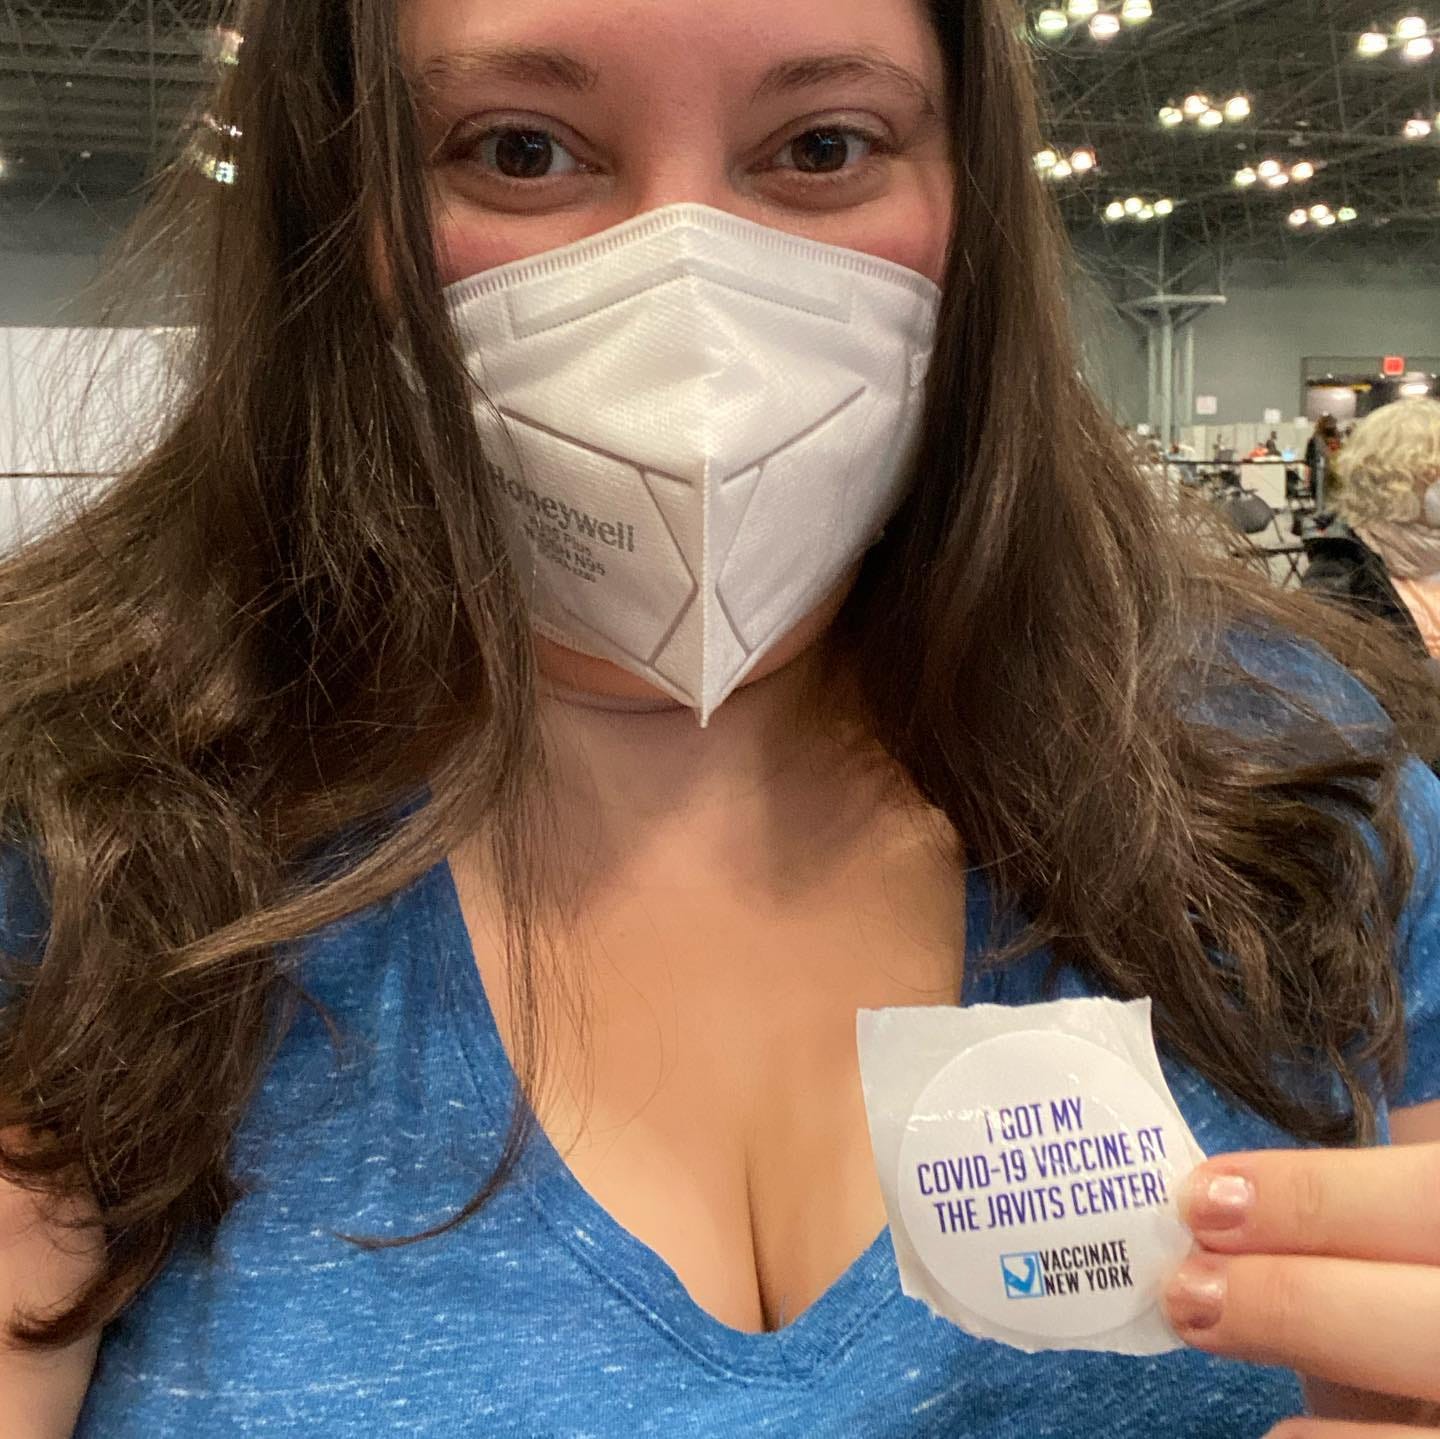 Pfizer vaccine dose 1 at Javits Center